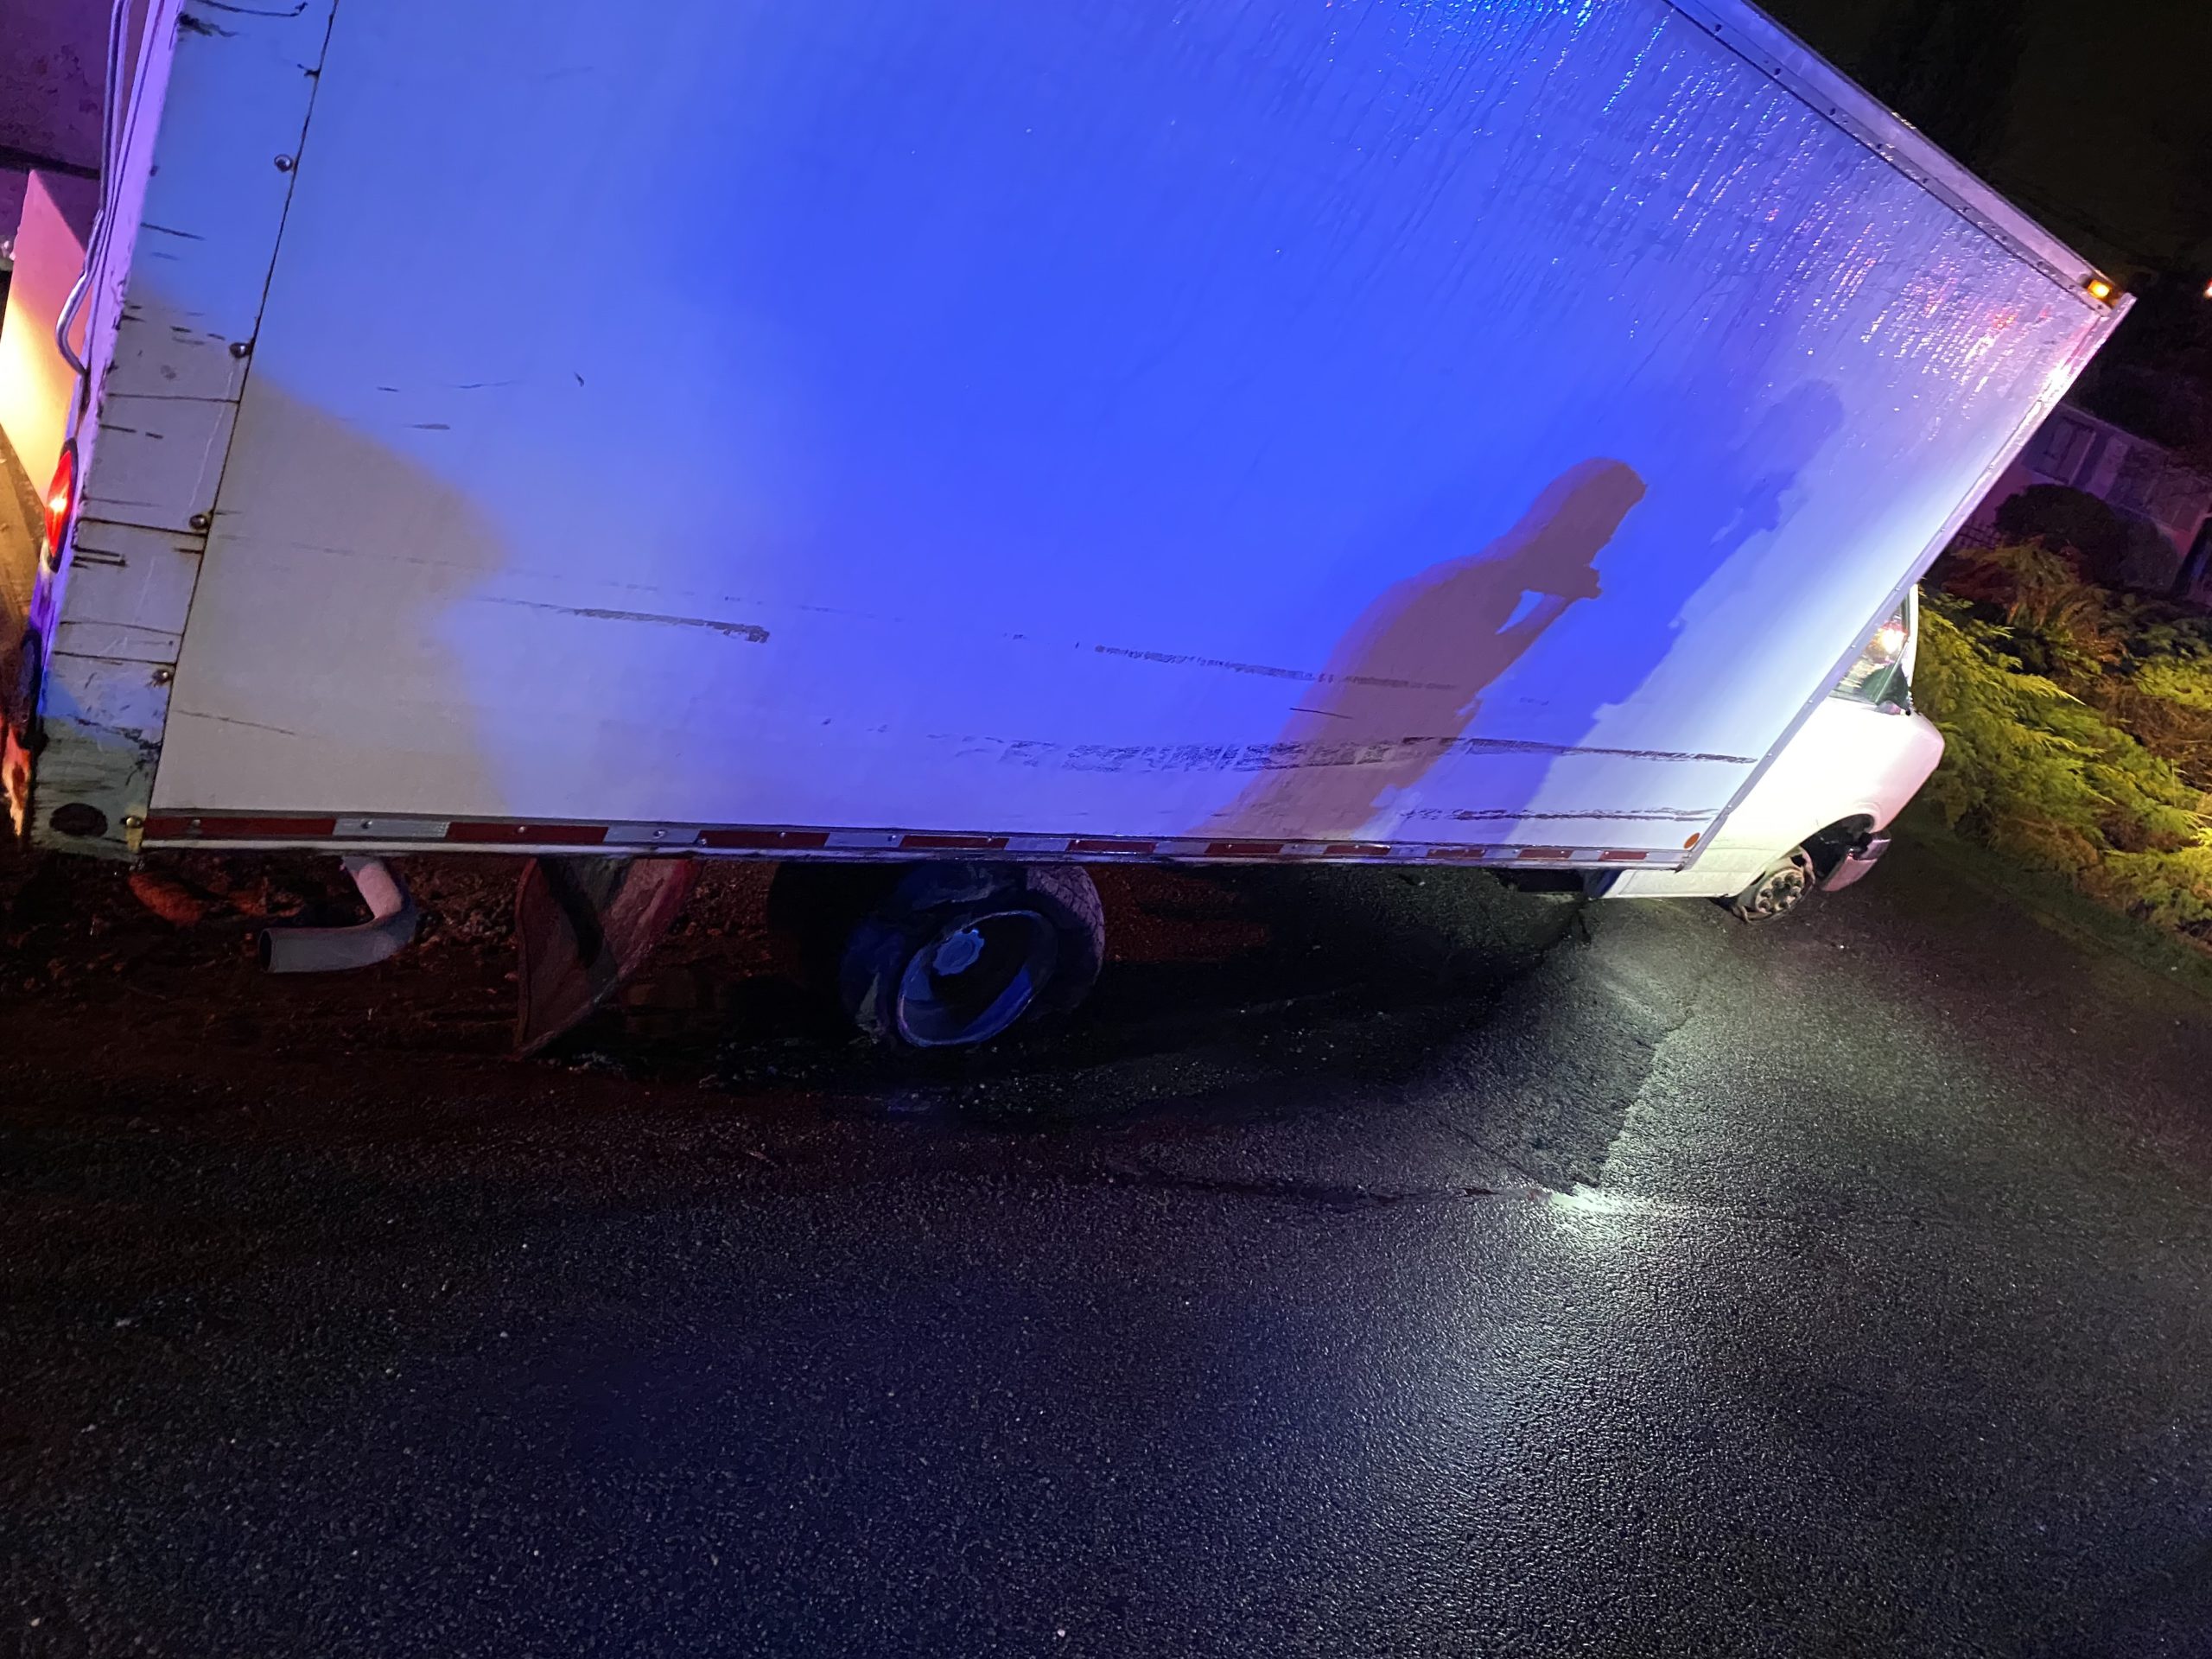 A white cube van with flat tires is illuminated by blue and red police lights